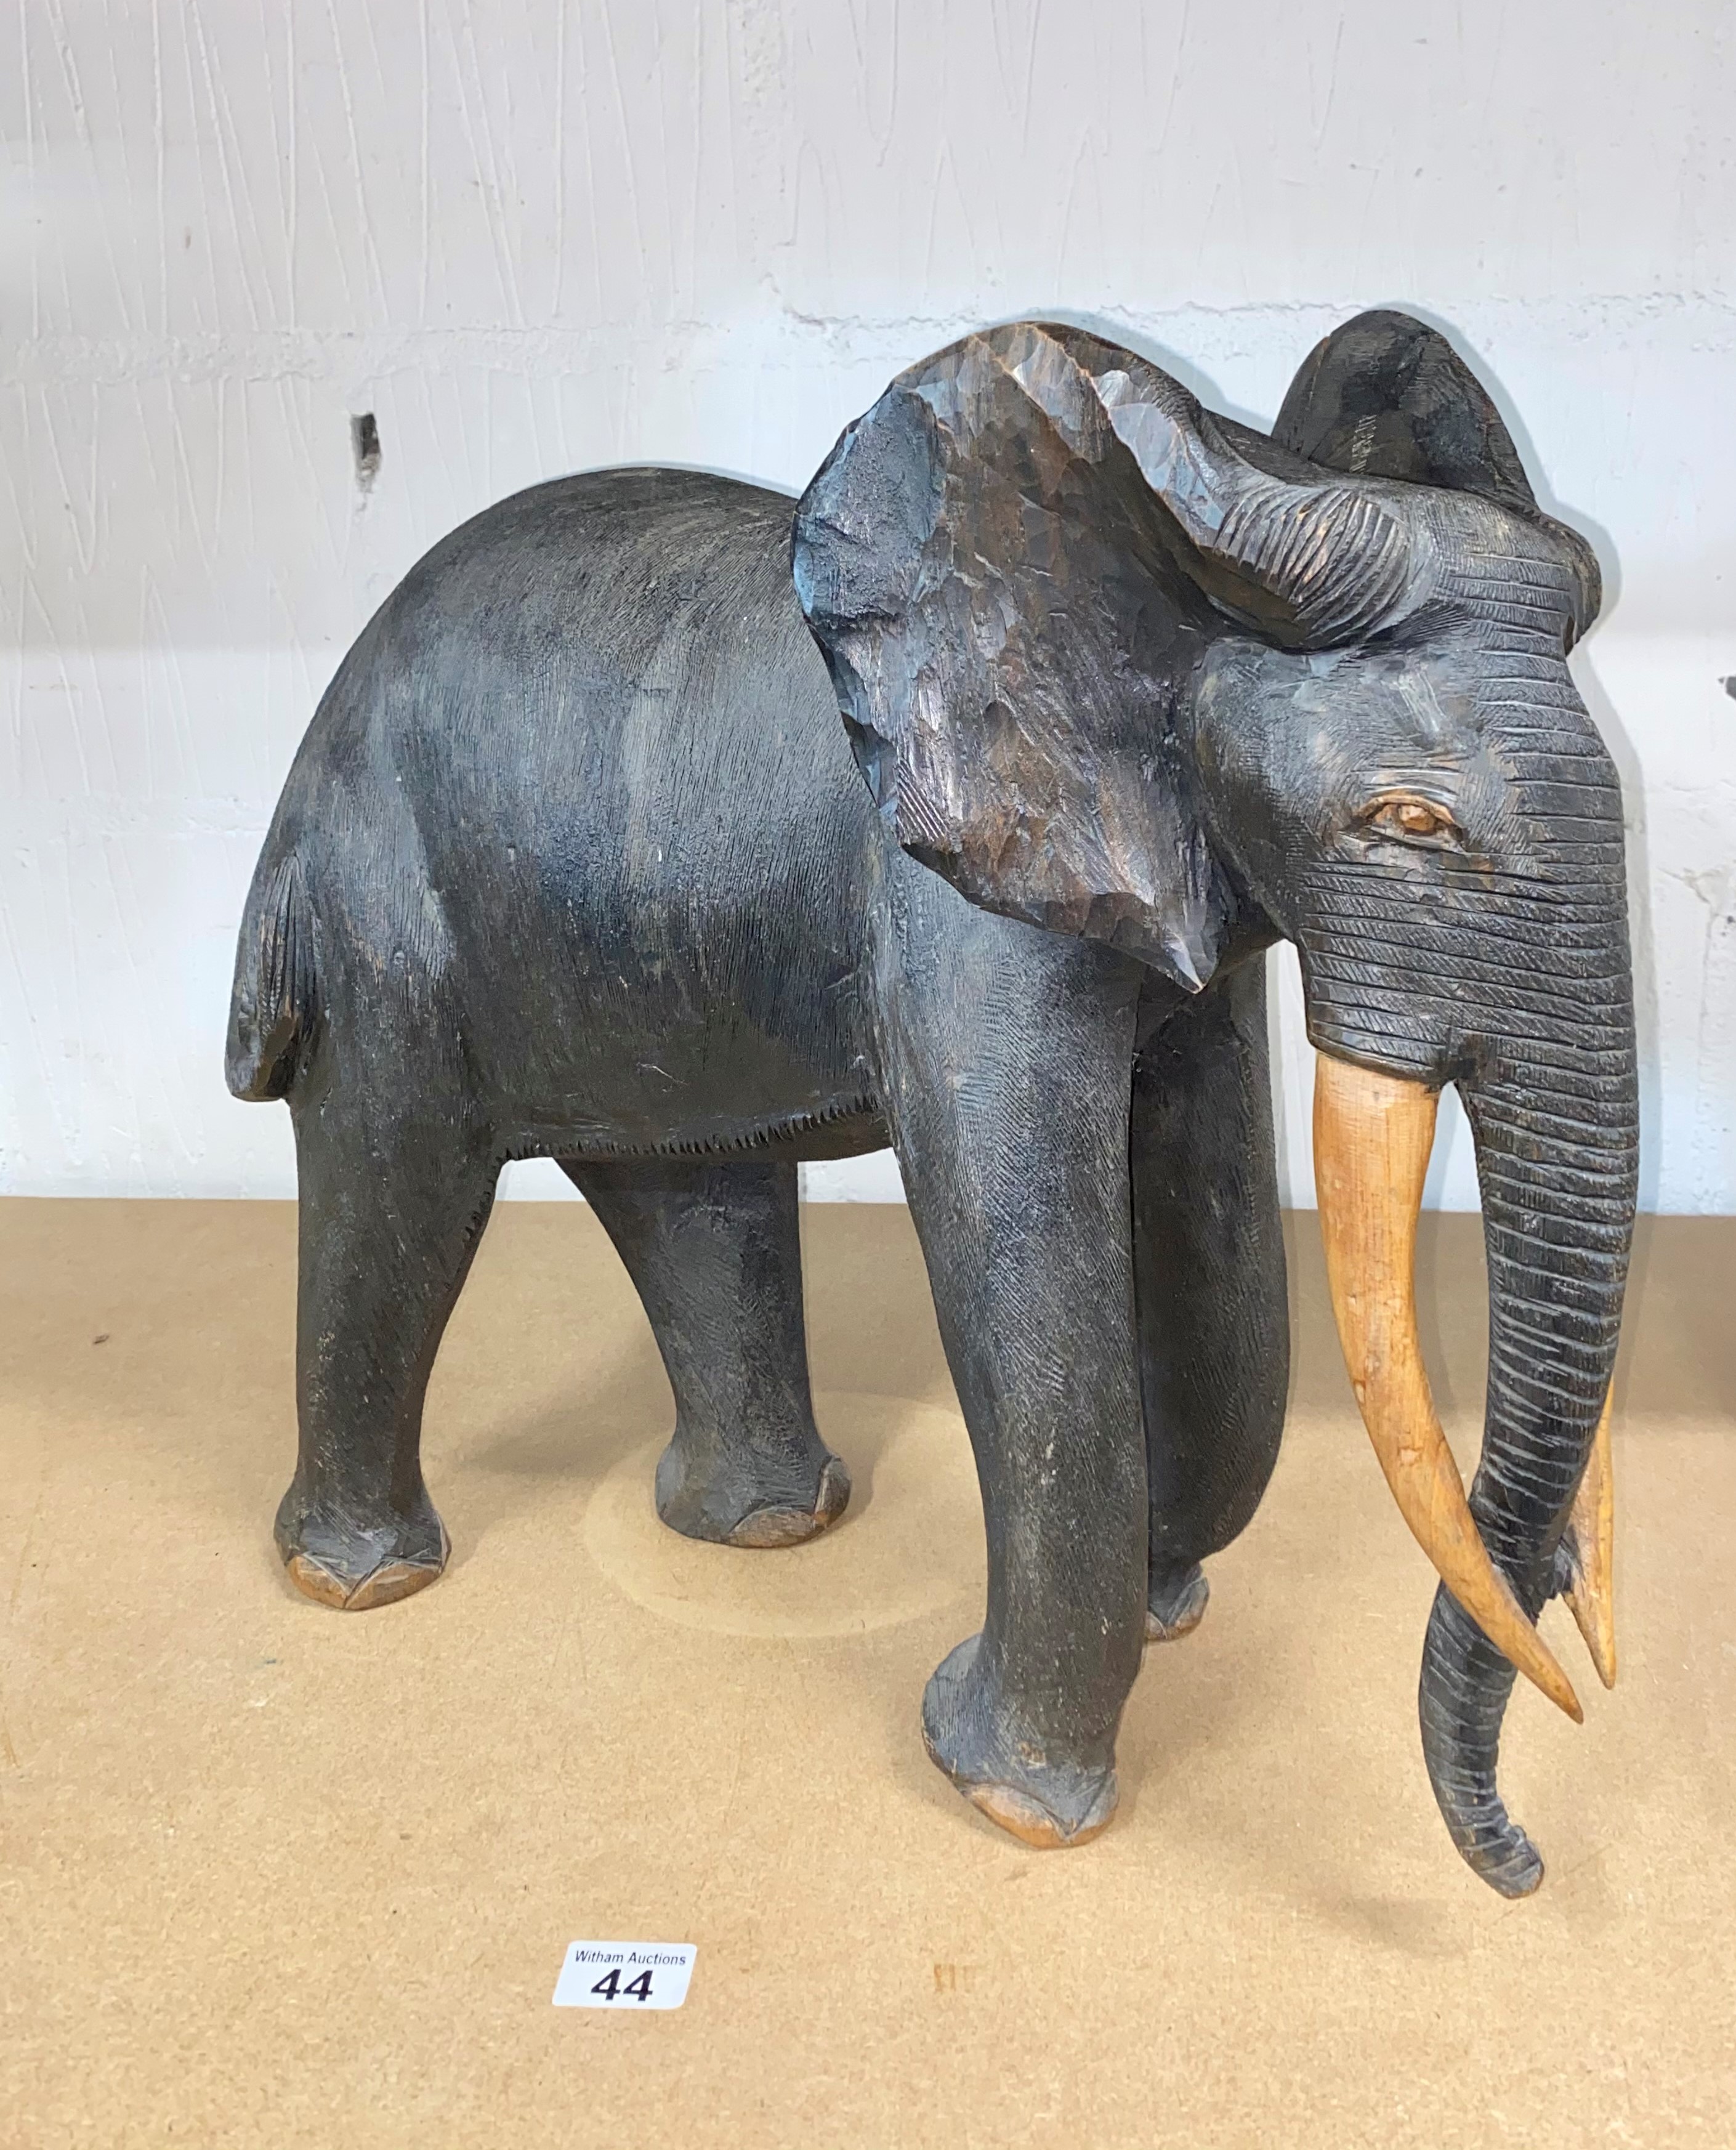 Hand carved hardwood African Elephant in standing stance, approx. H46cm, A/F to ear